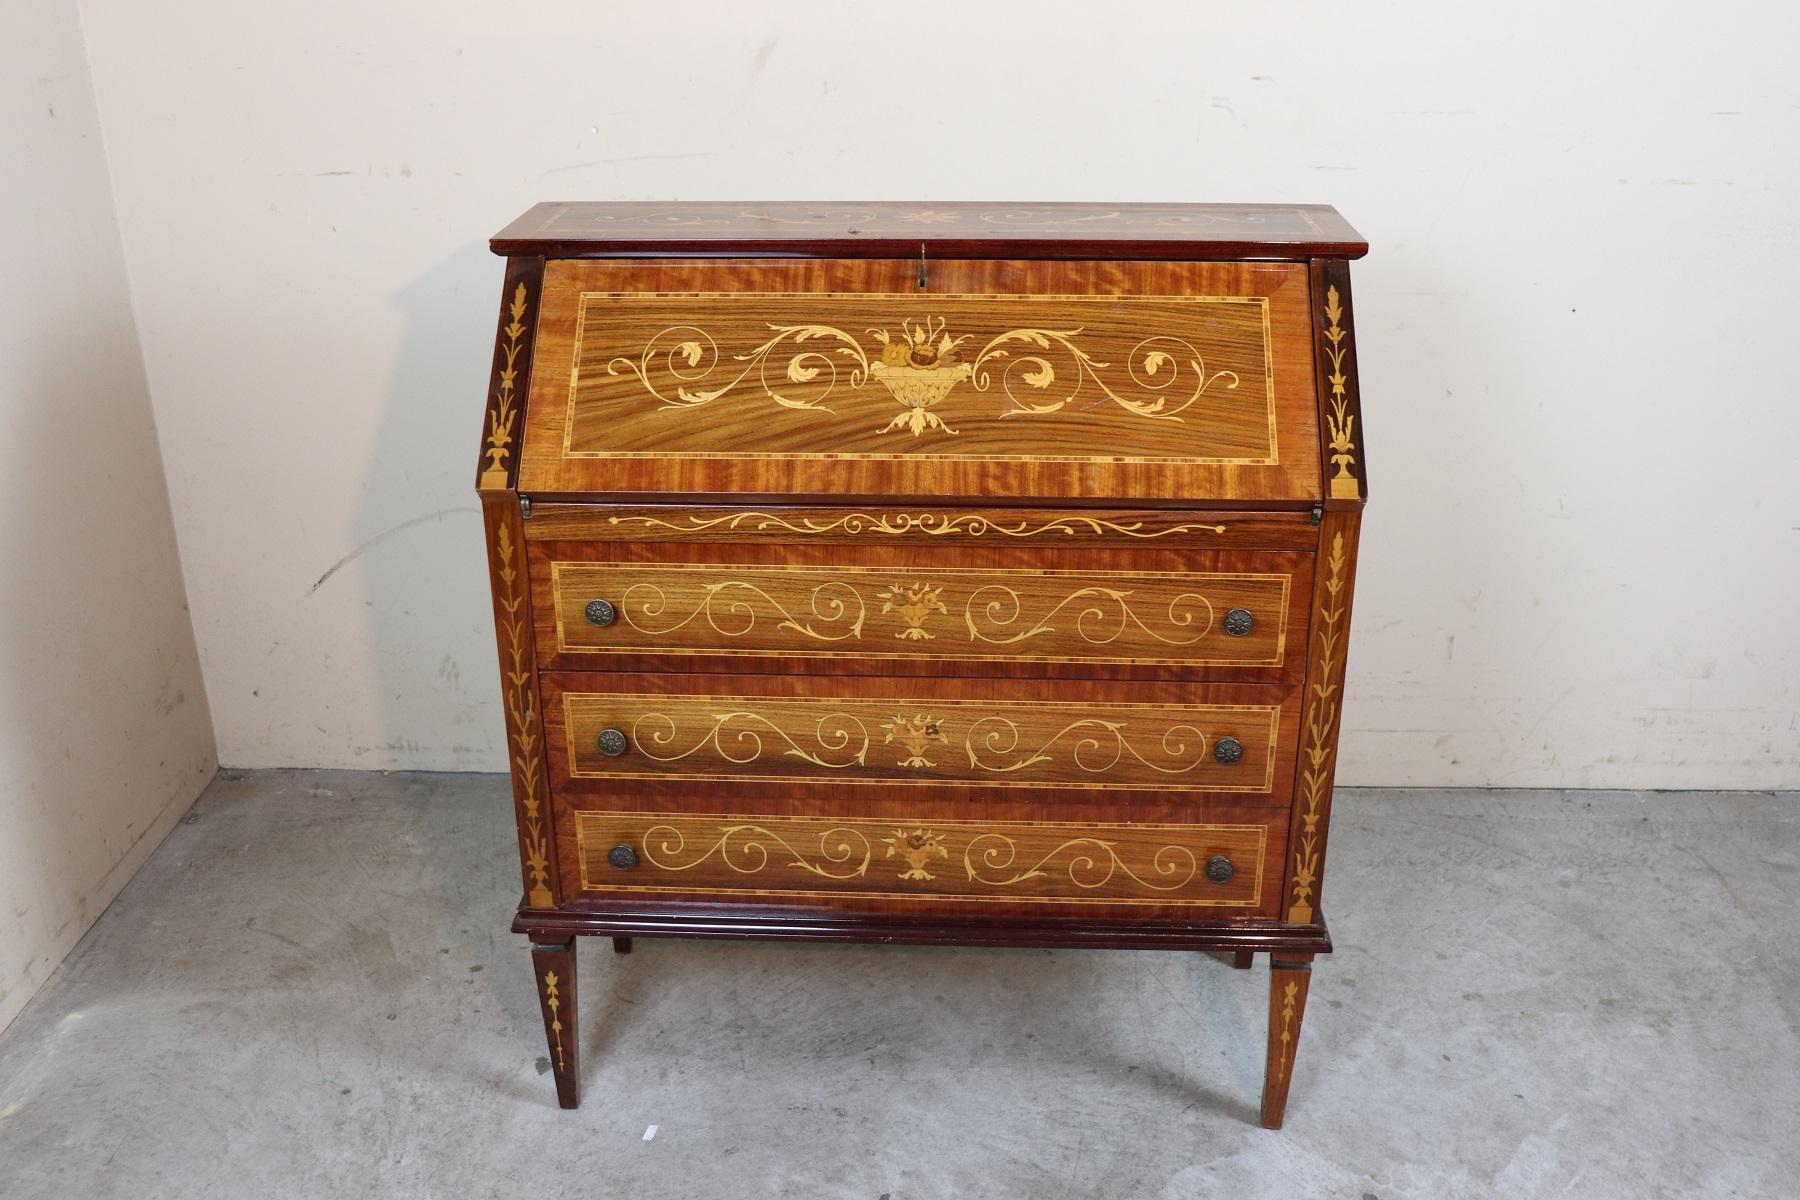 Important elegant chest with secretaire rosewood inlaid with wood essences of various types, full Louis XVI Style period, 1950s. The Rosewood inlay work is extremely meticulous. Work possible only by major cabinet makers. We recommend looking at the